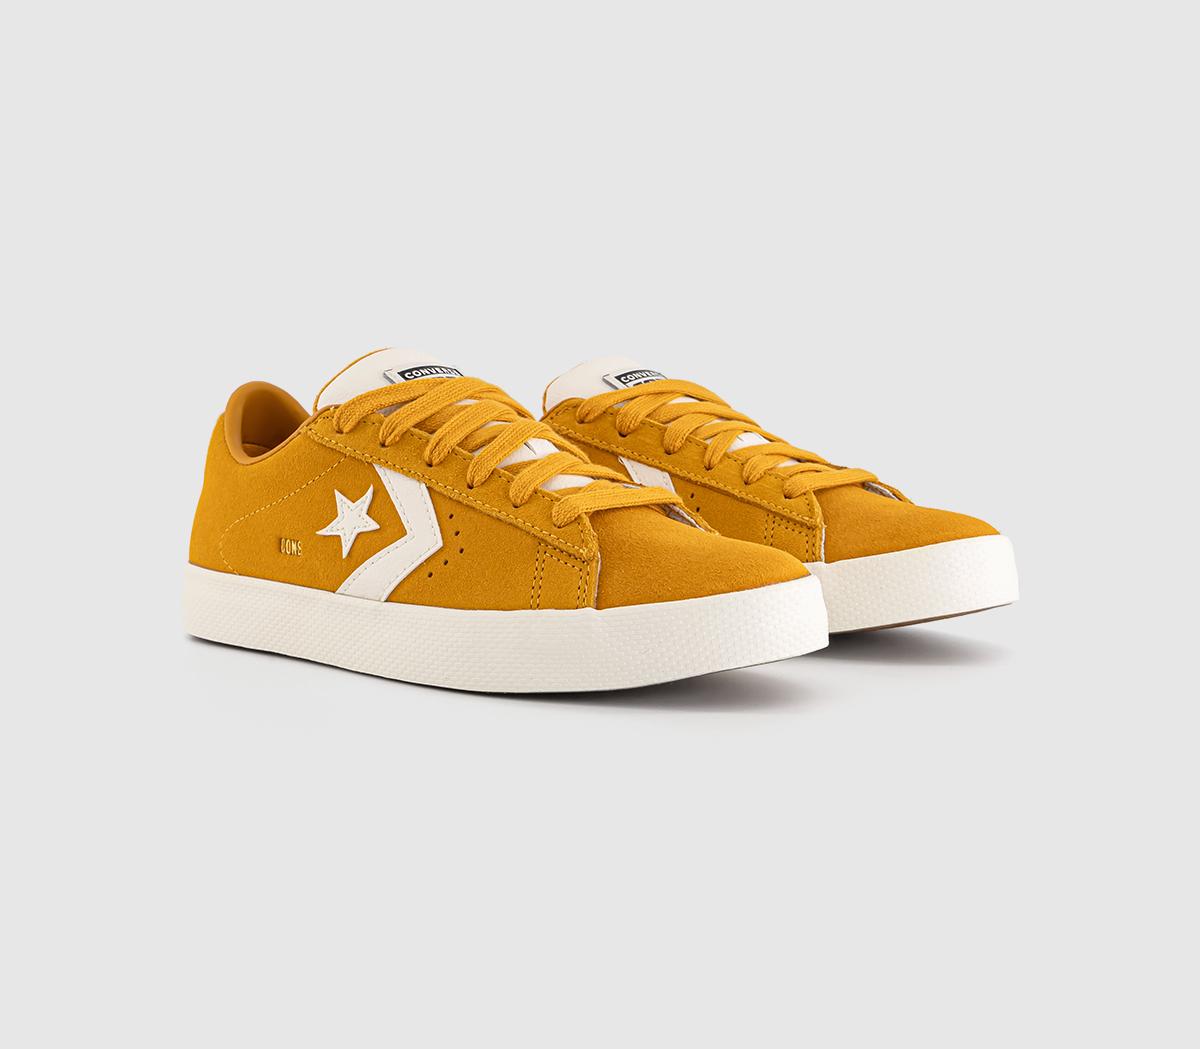 Converse Womens Pl Vulc Pro Ox Trainers Sunflower Gold Egret Yellow, 4